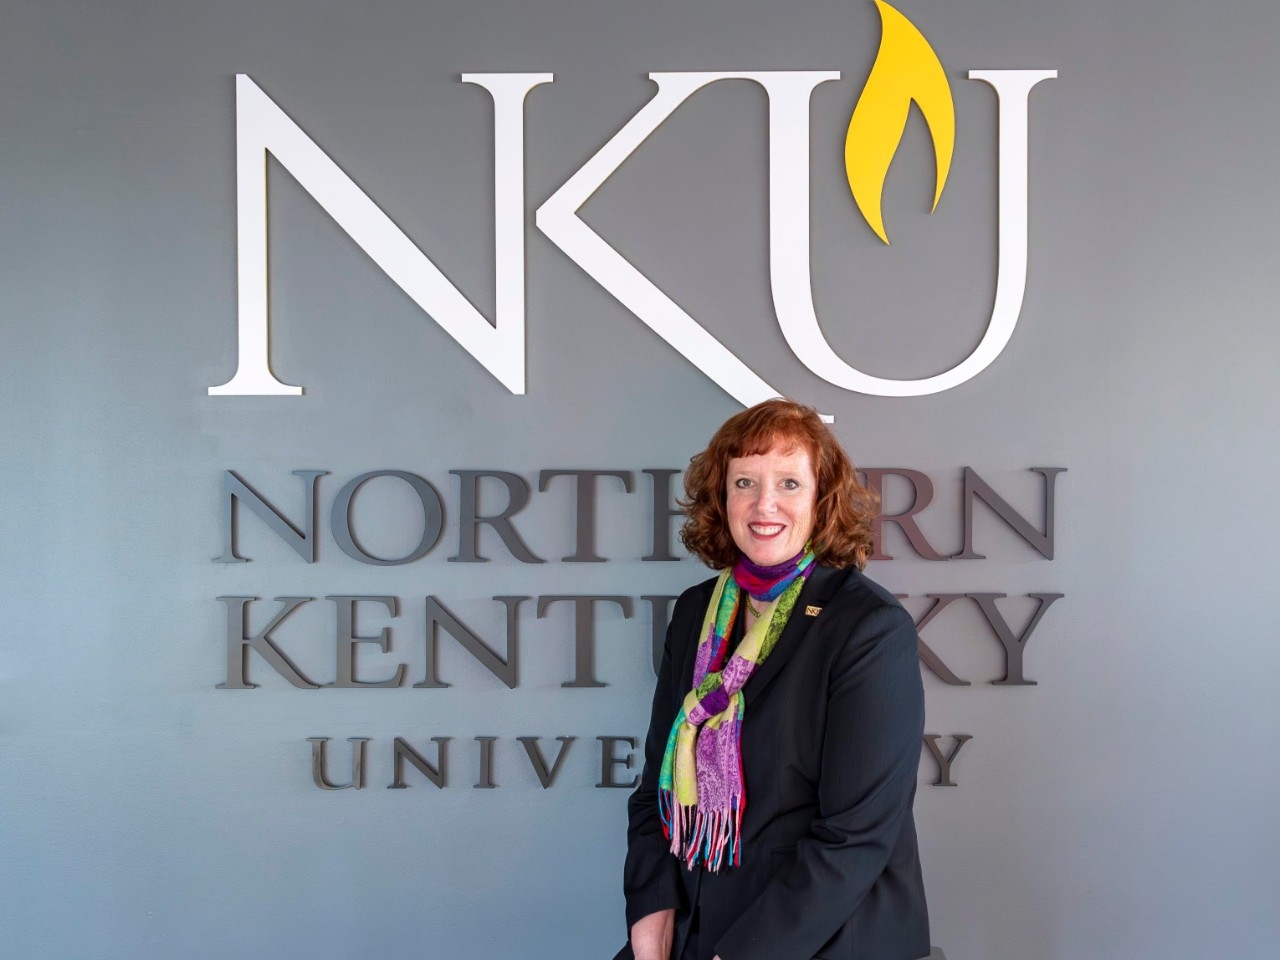 President Cady Short-Thompson in front of NKU sign.